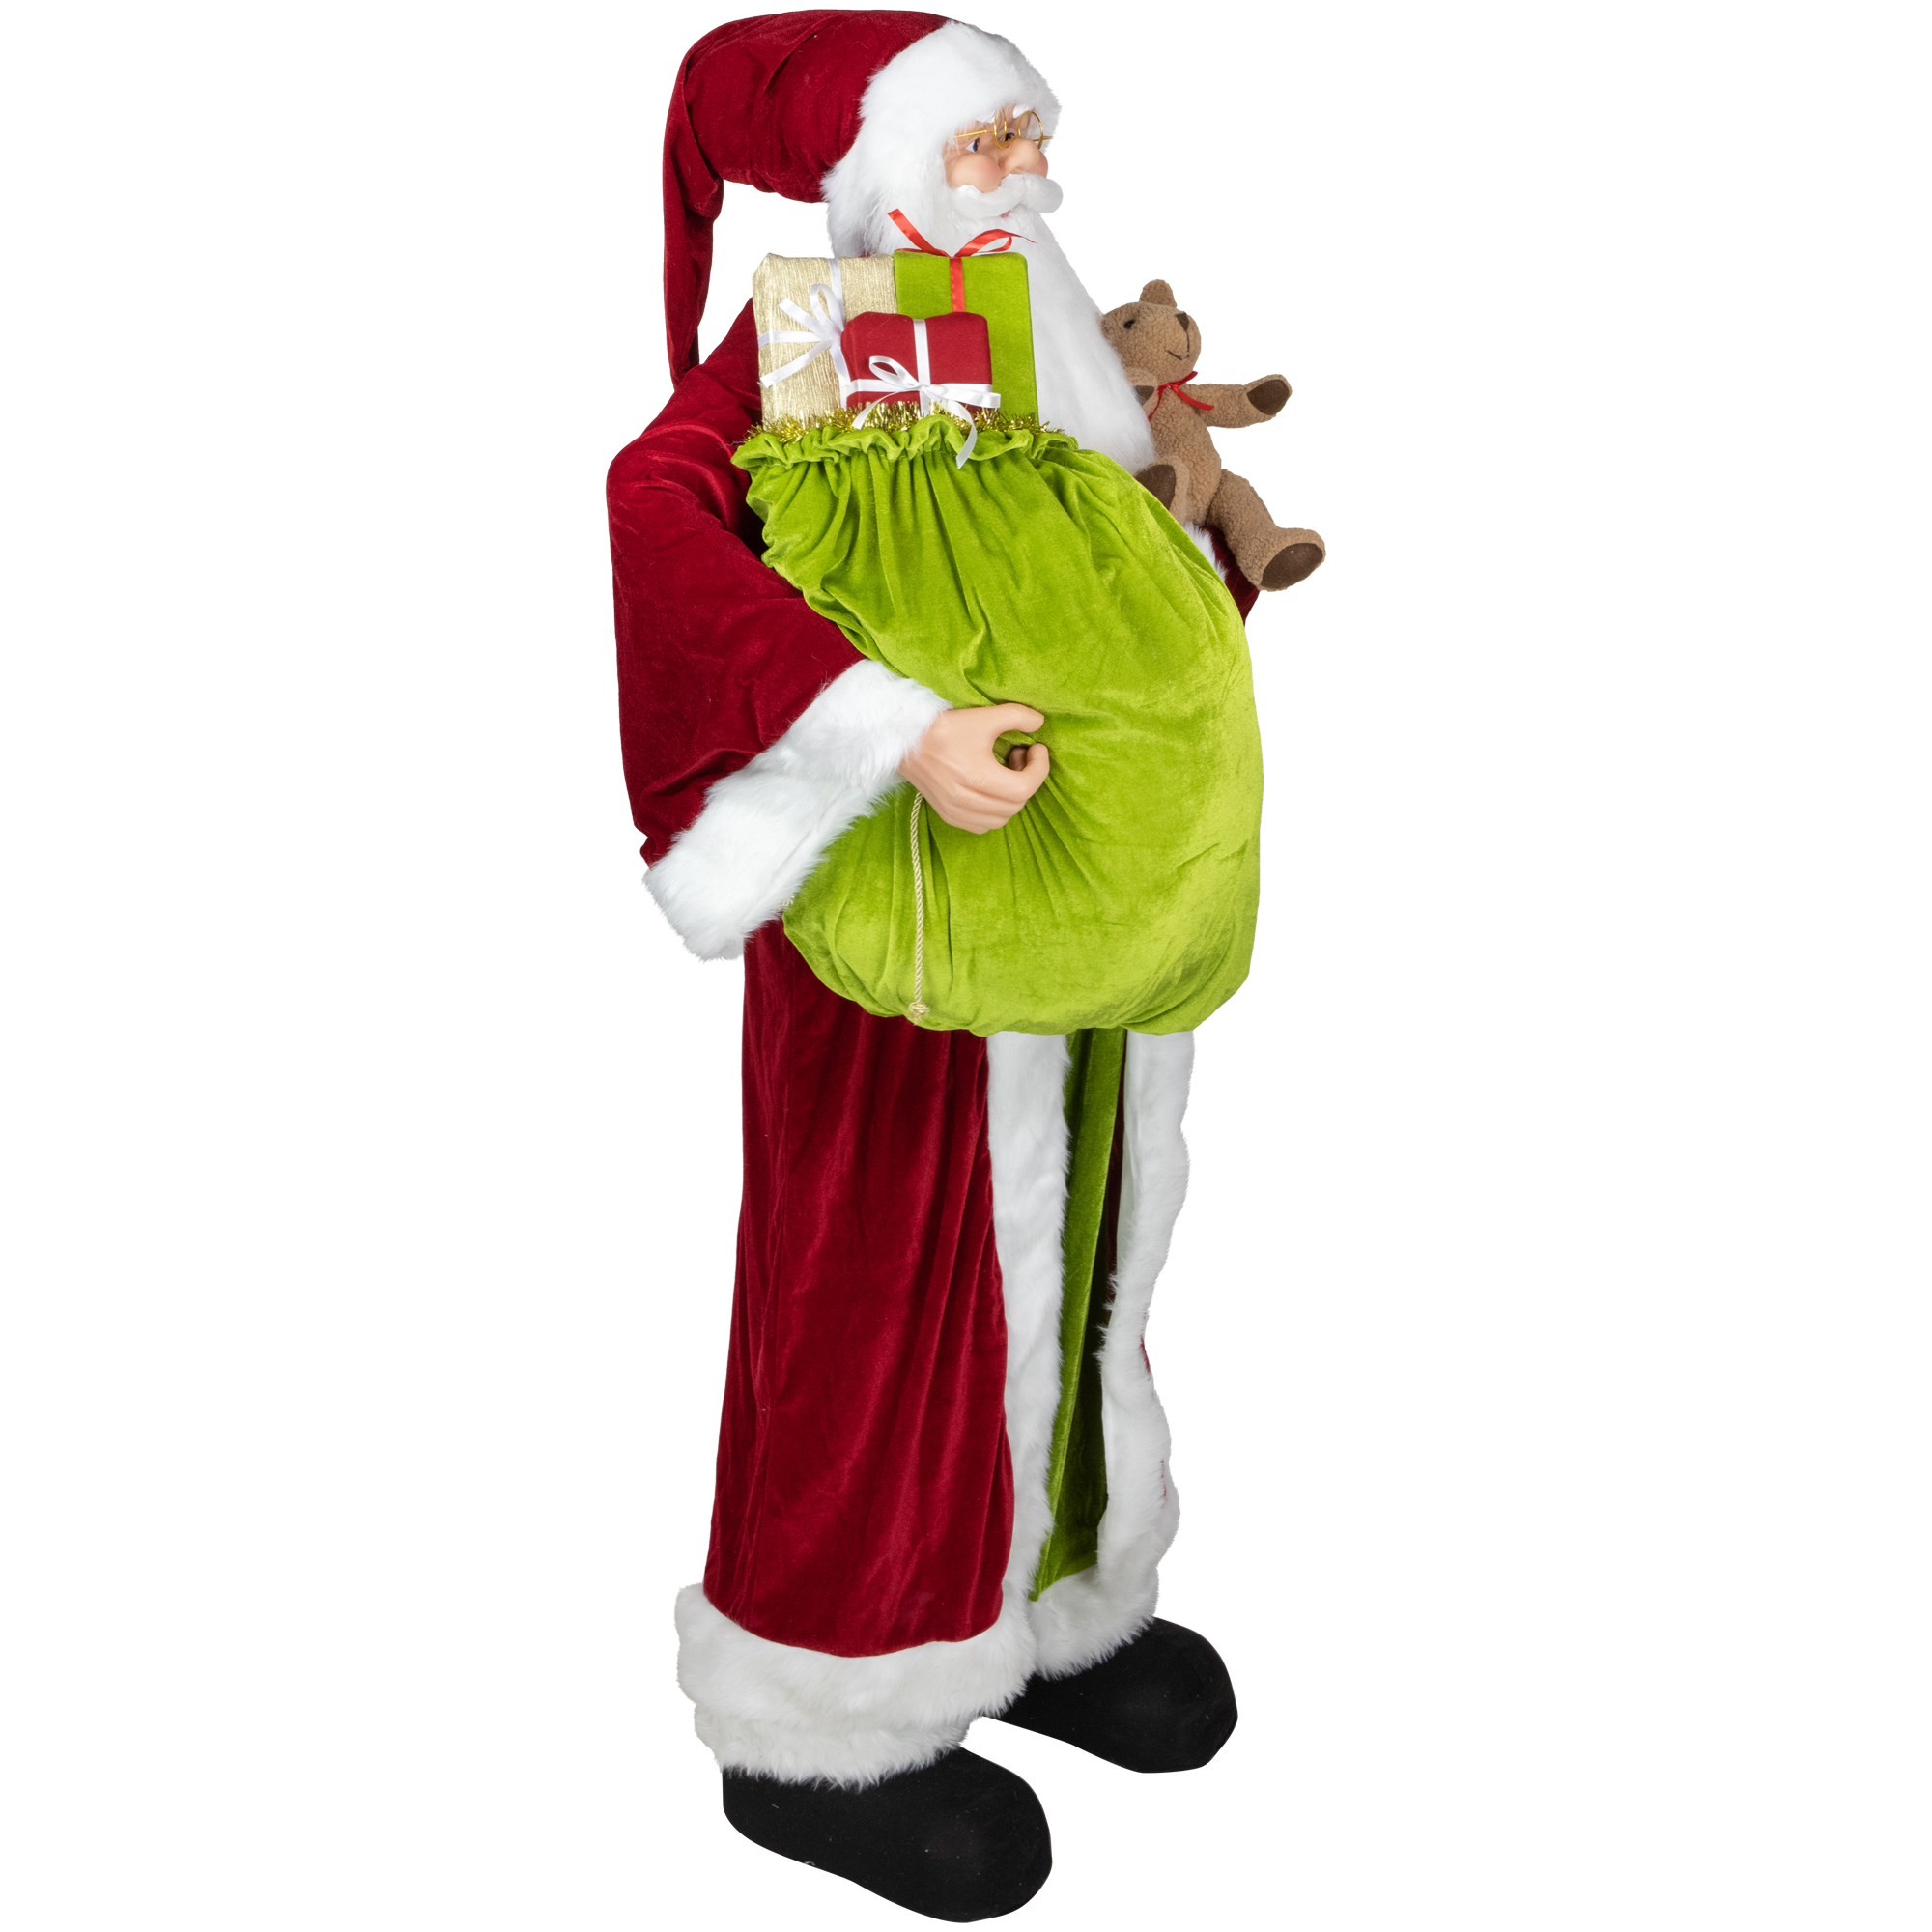 Northlight Plush Santa Claus with Teddy Bear and Gift Bag Christmas Figure - 6' - Red and Green